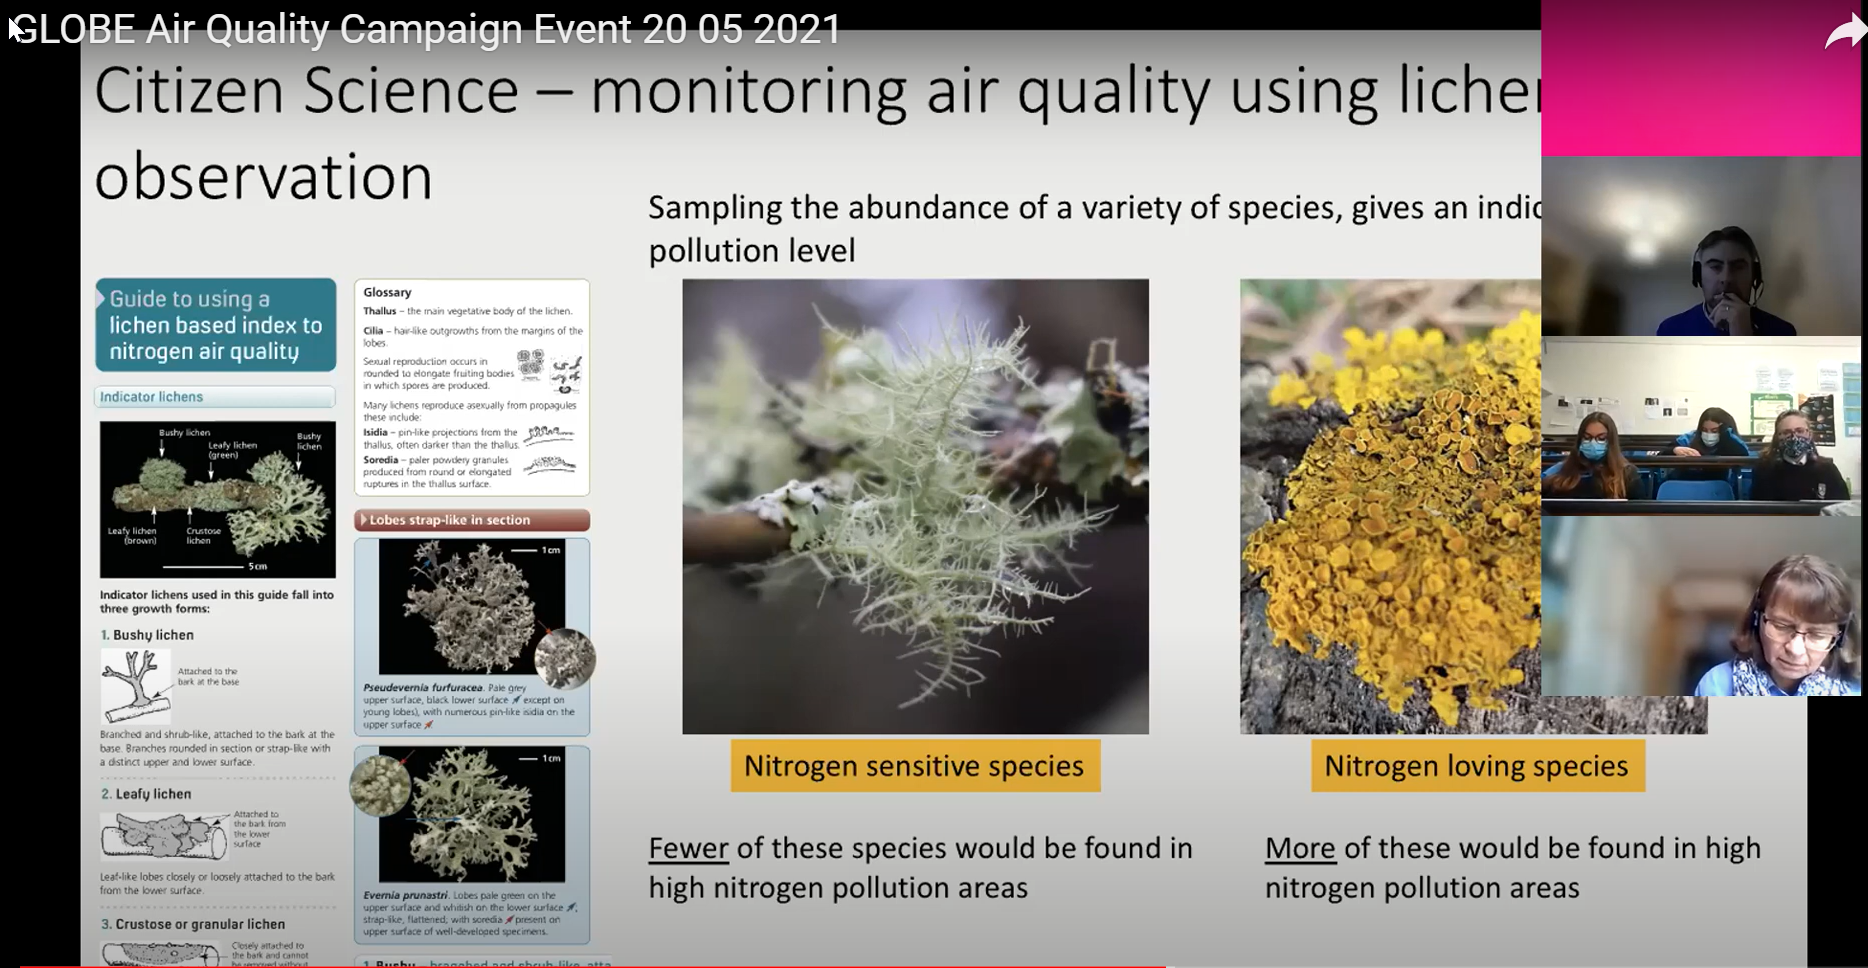 A screenshot from the online event showing the citizen science data